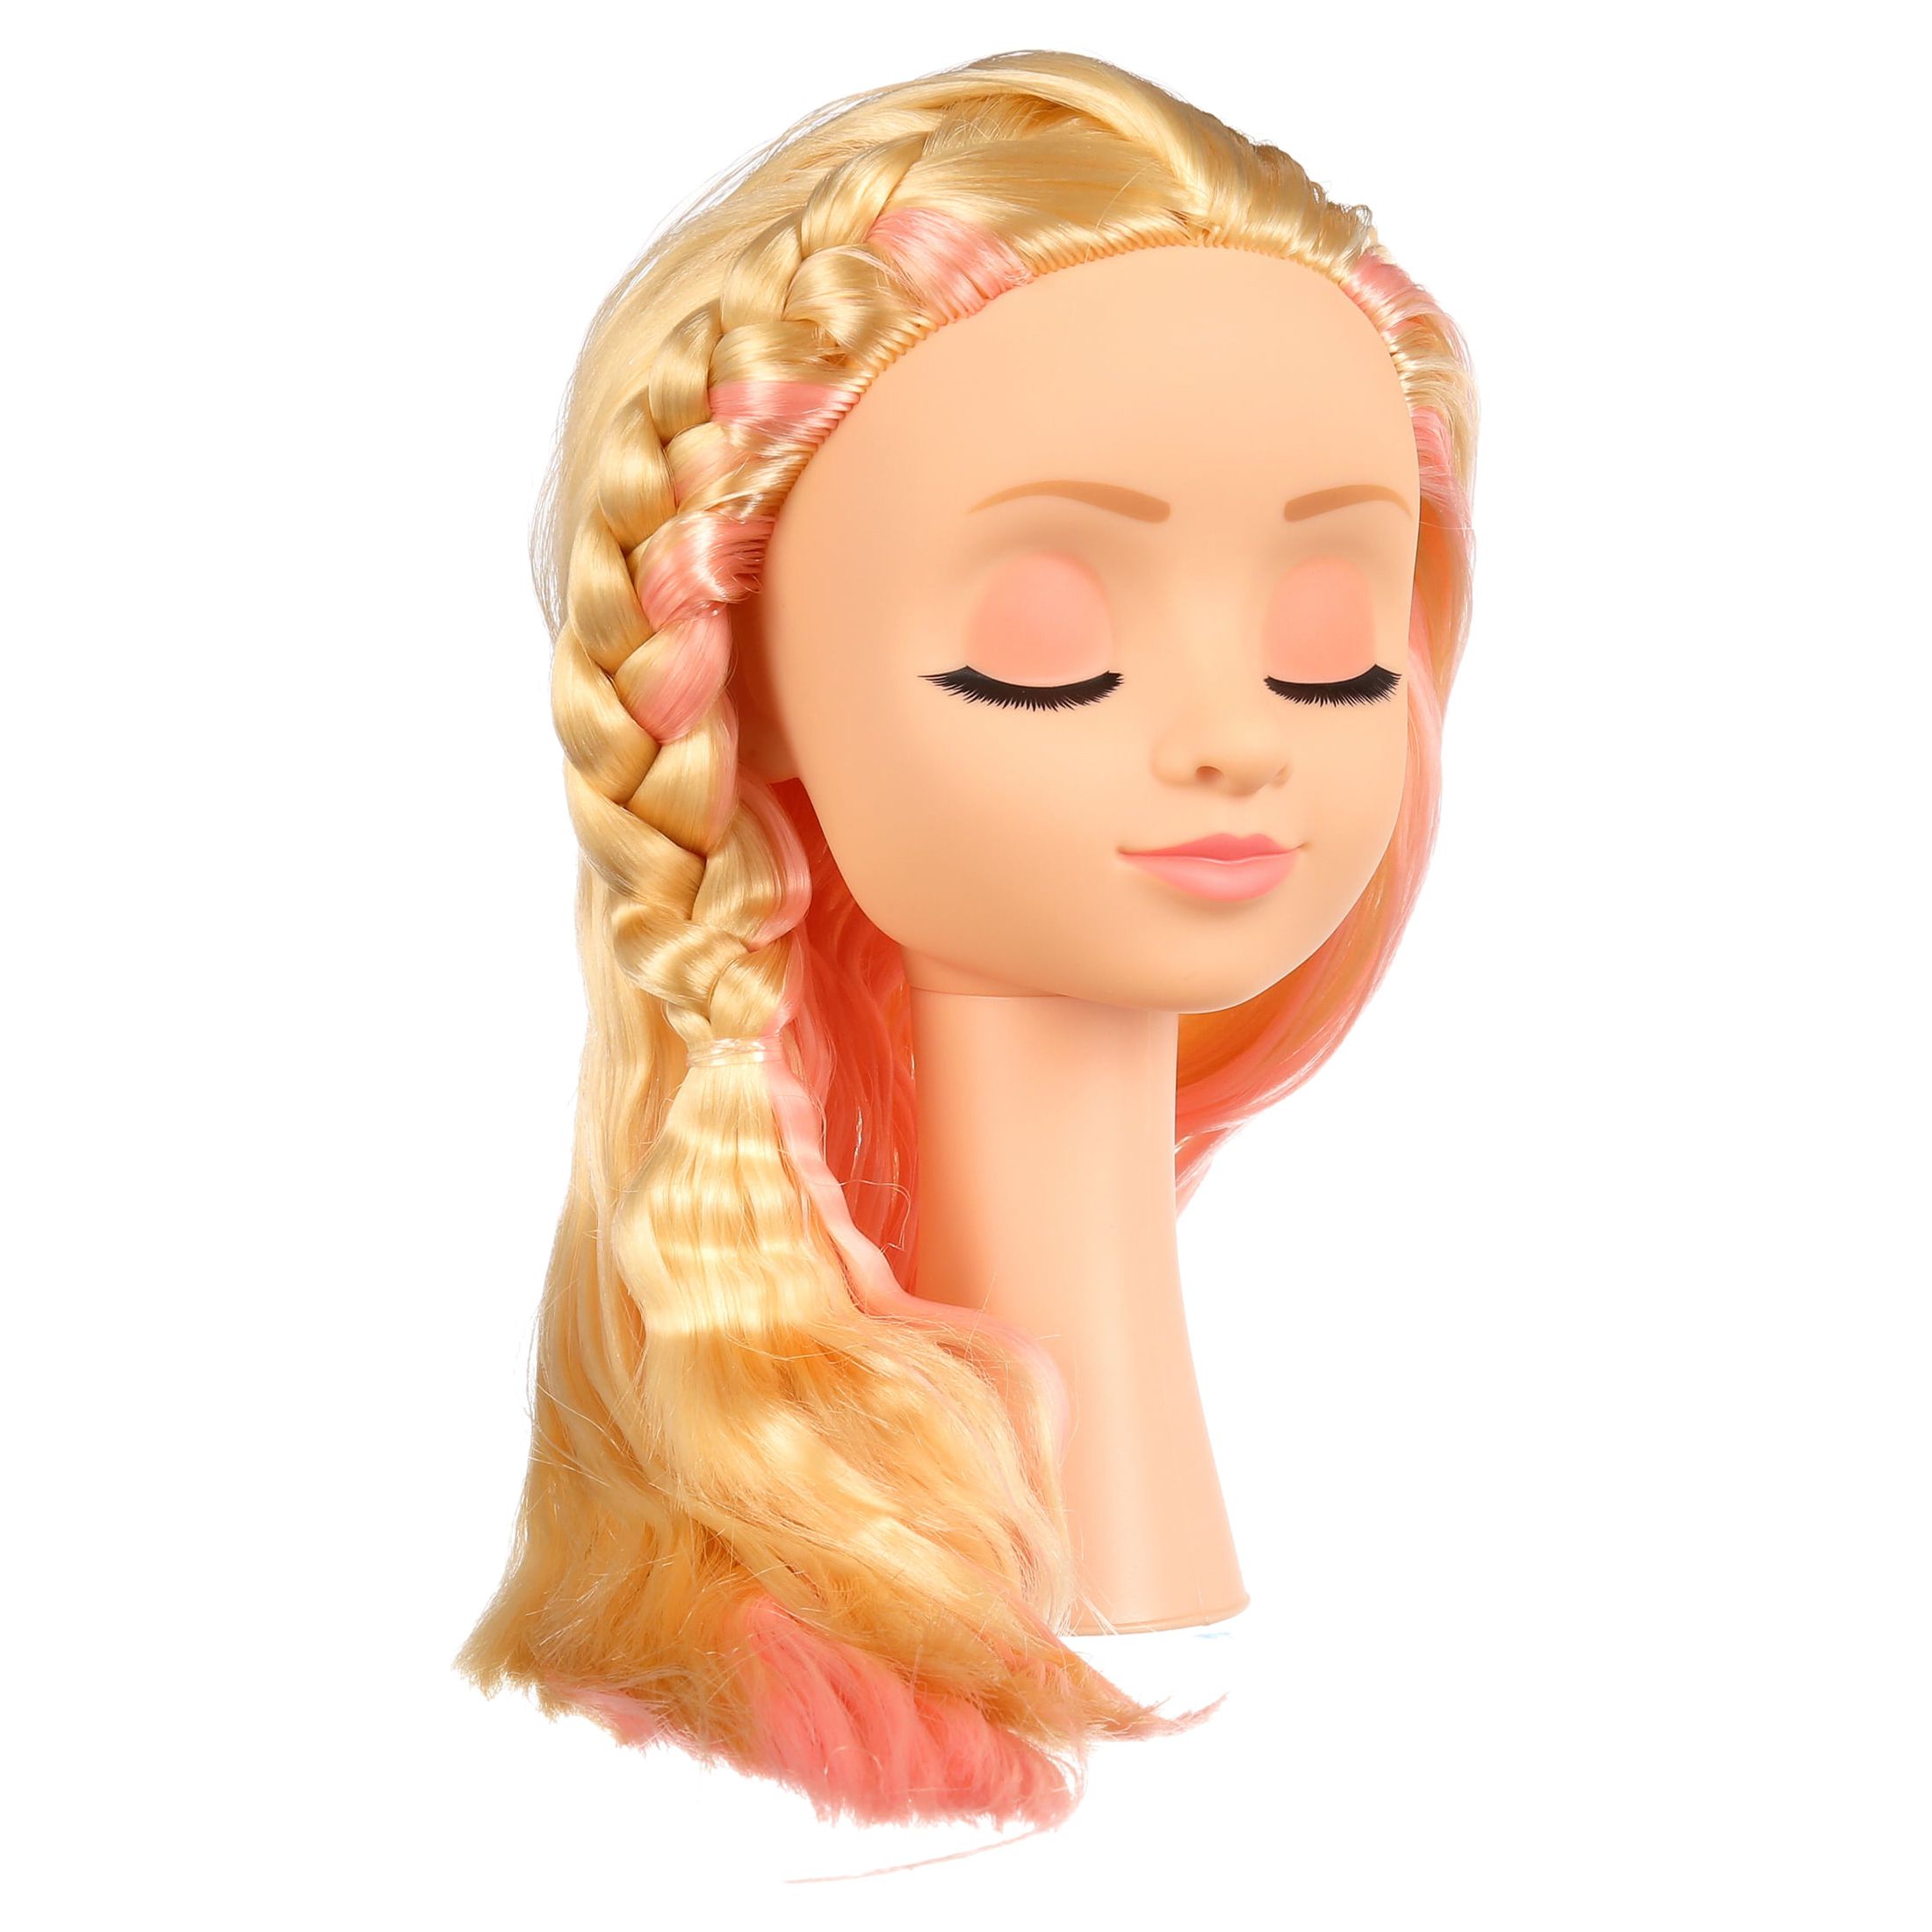 Cute Girls Hairstyles Styling Head Doll Playset, 20 Pieces - image 5 of 8